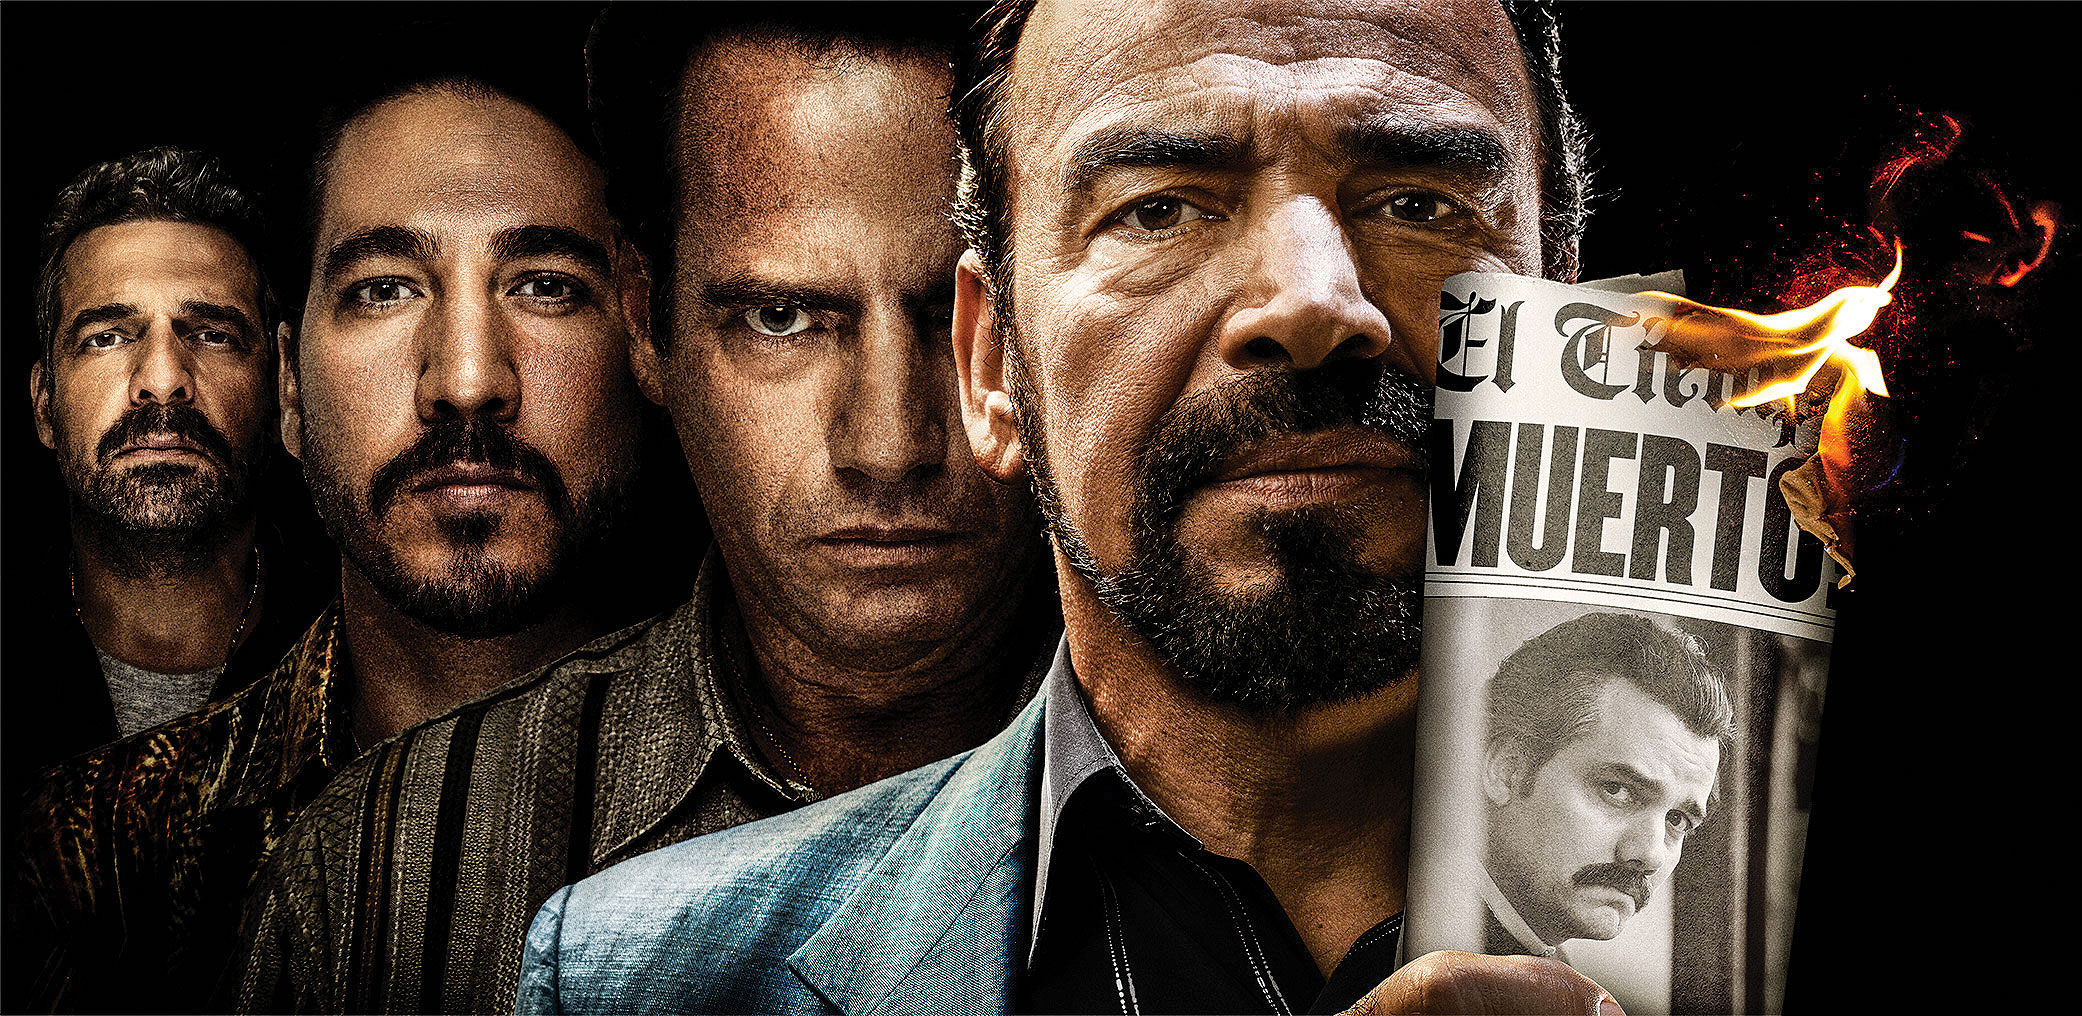 Times Digital Download: Narcos returns with the thrilling Season 3